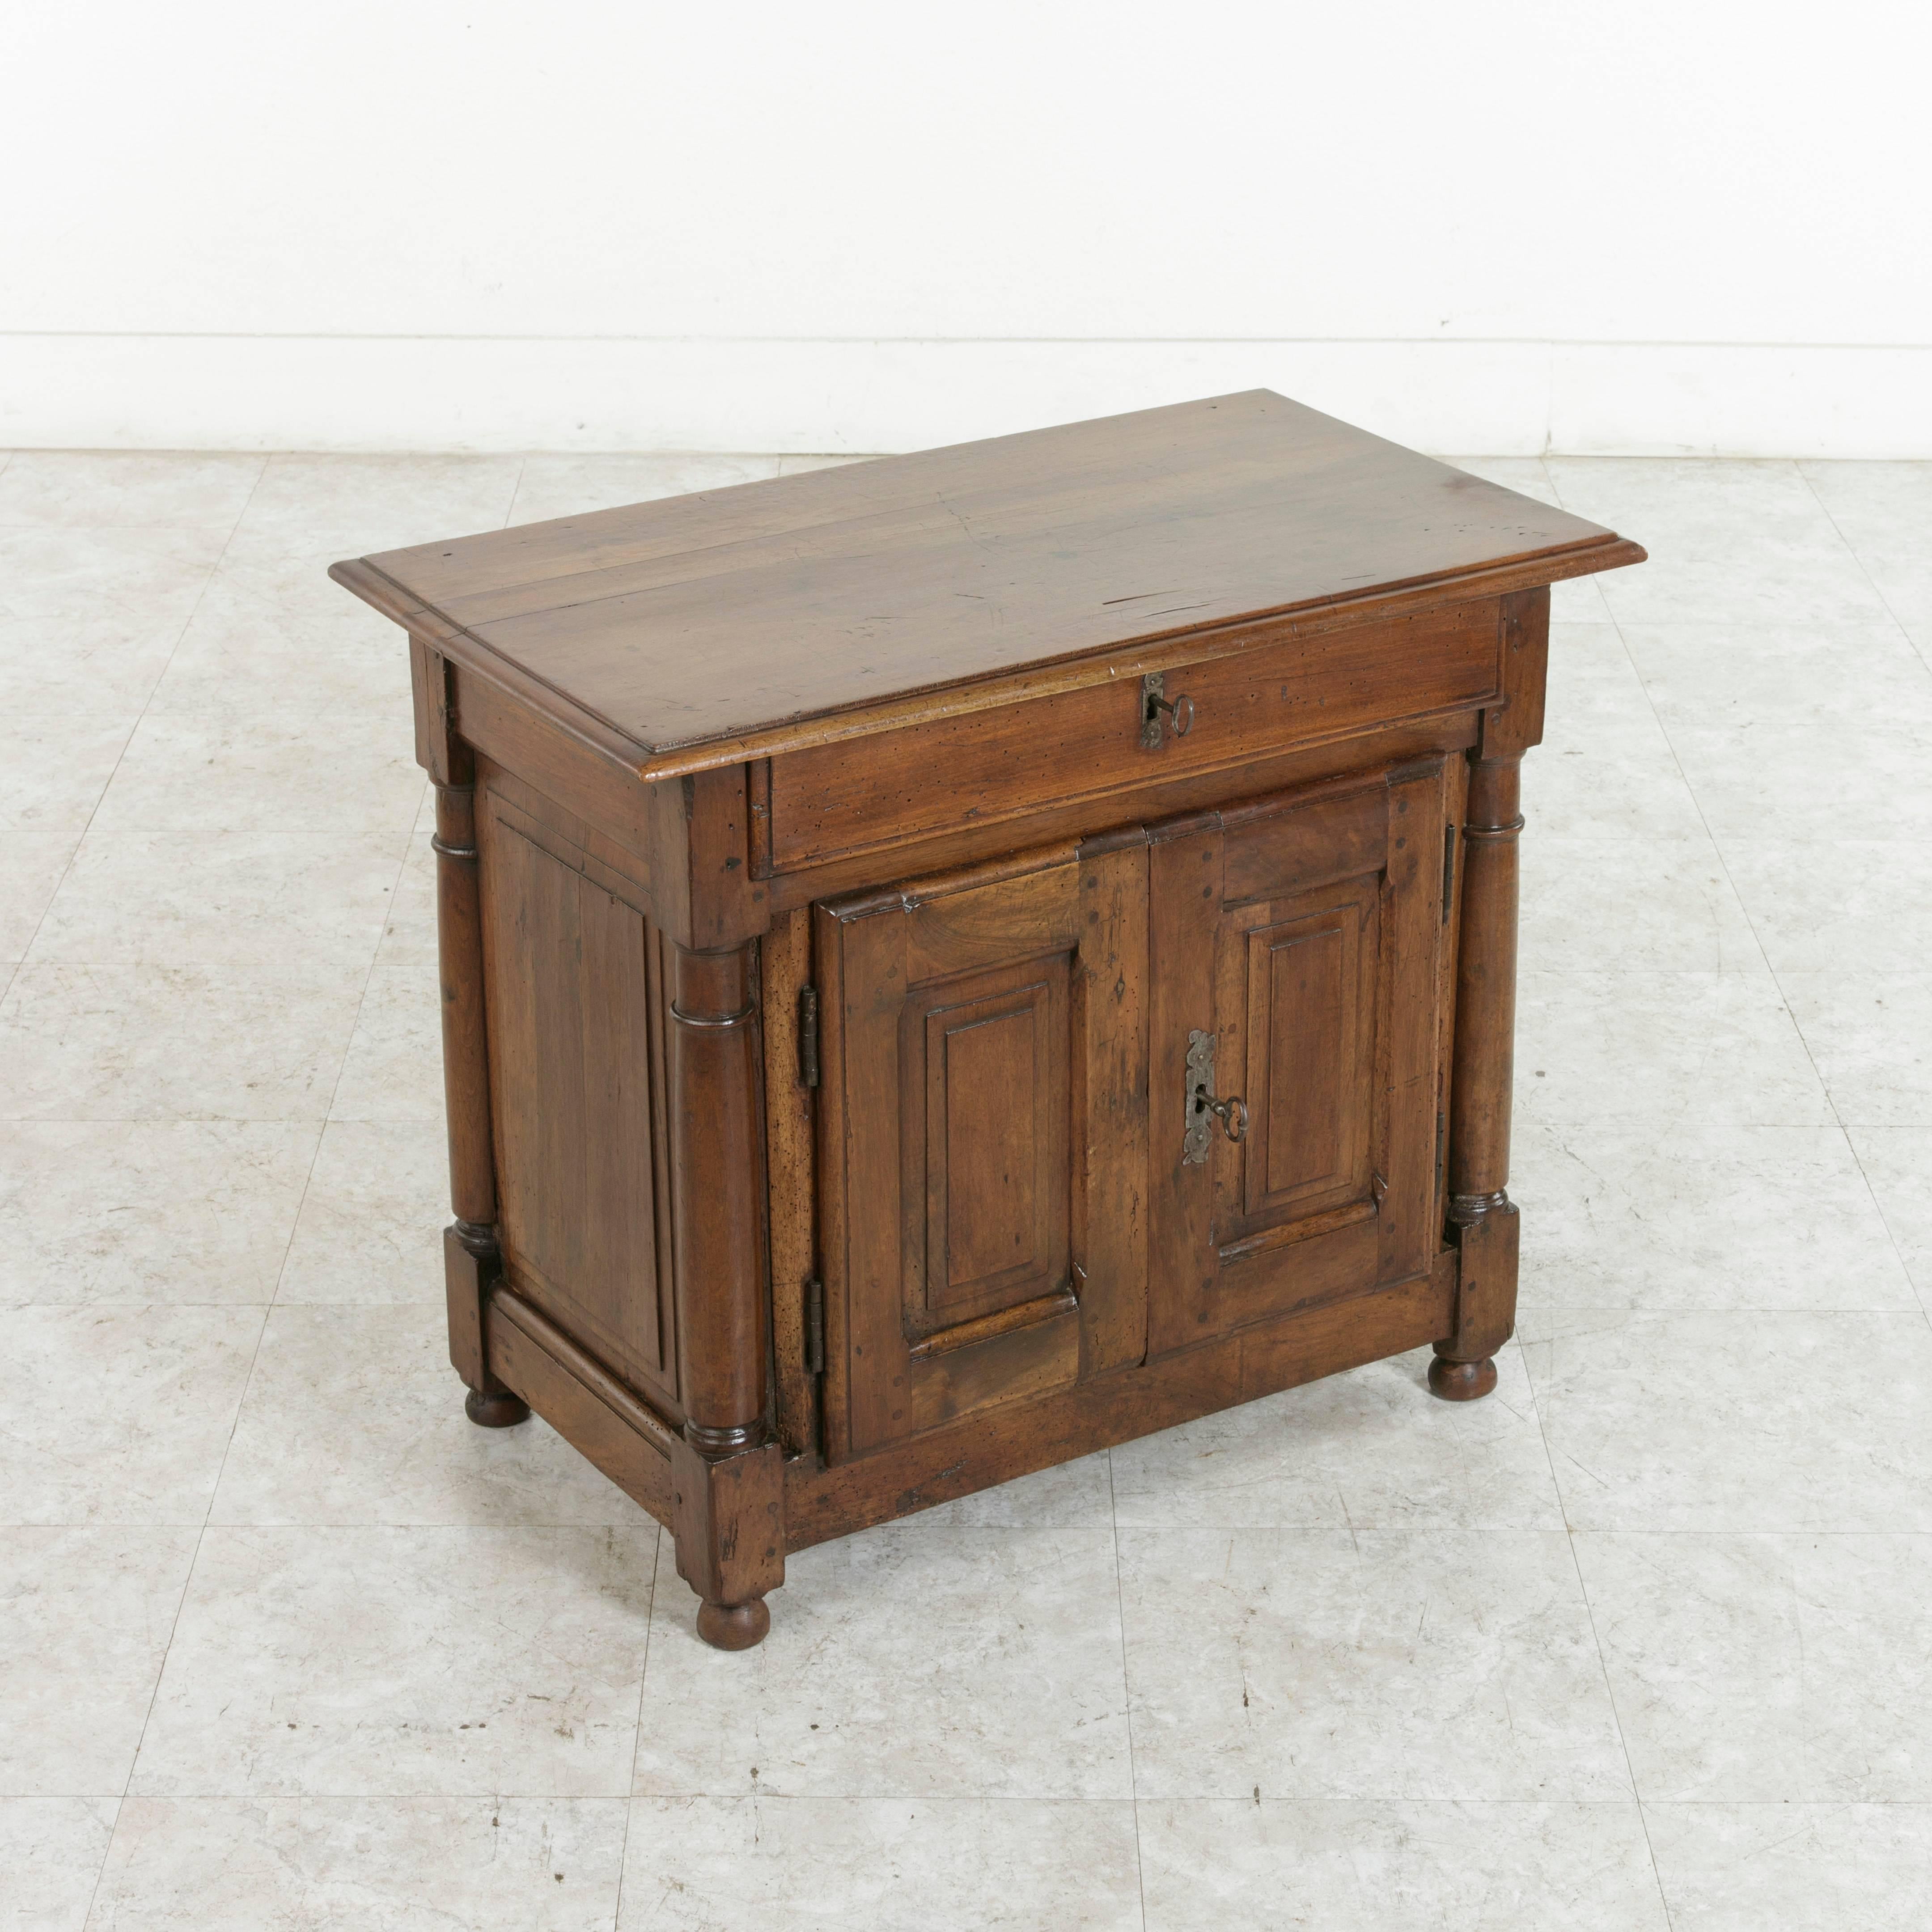 Originally used in a French convent, this small-scale late 18th century walnut cabinet or side table is uniquely double faced with raised panels on all sides and a hand-turned column at each corner. Hand pegged capitals and plinths and small bun